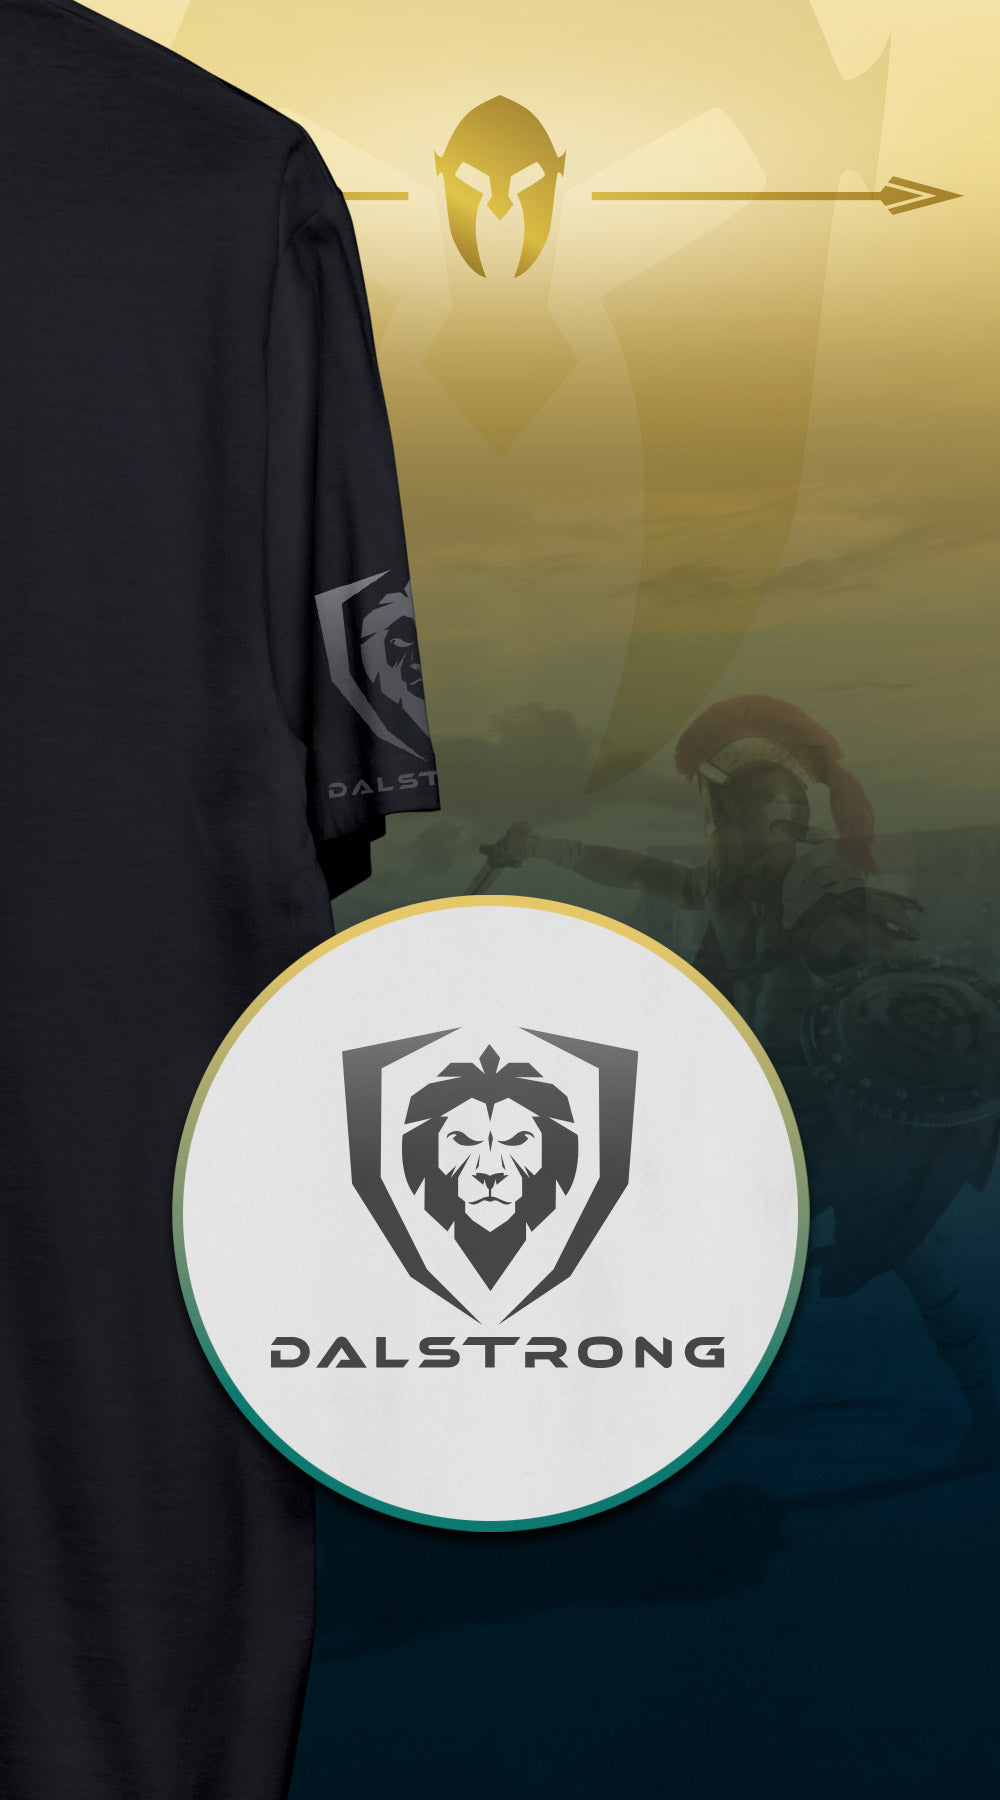 Dalstrong beast mode on tee black with dalstrong name and logo.